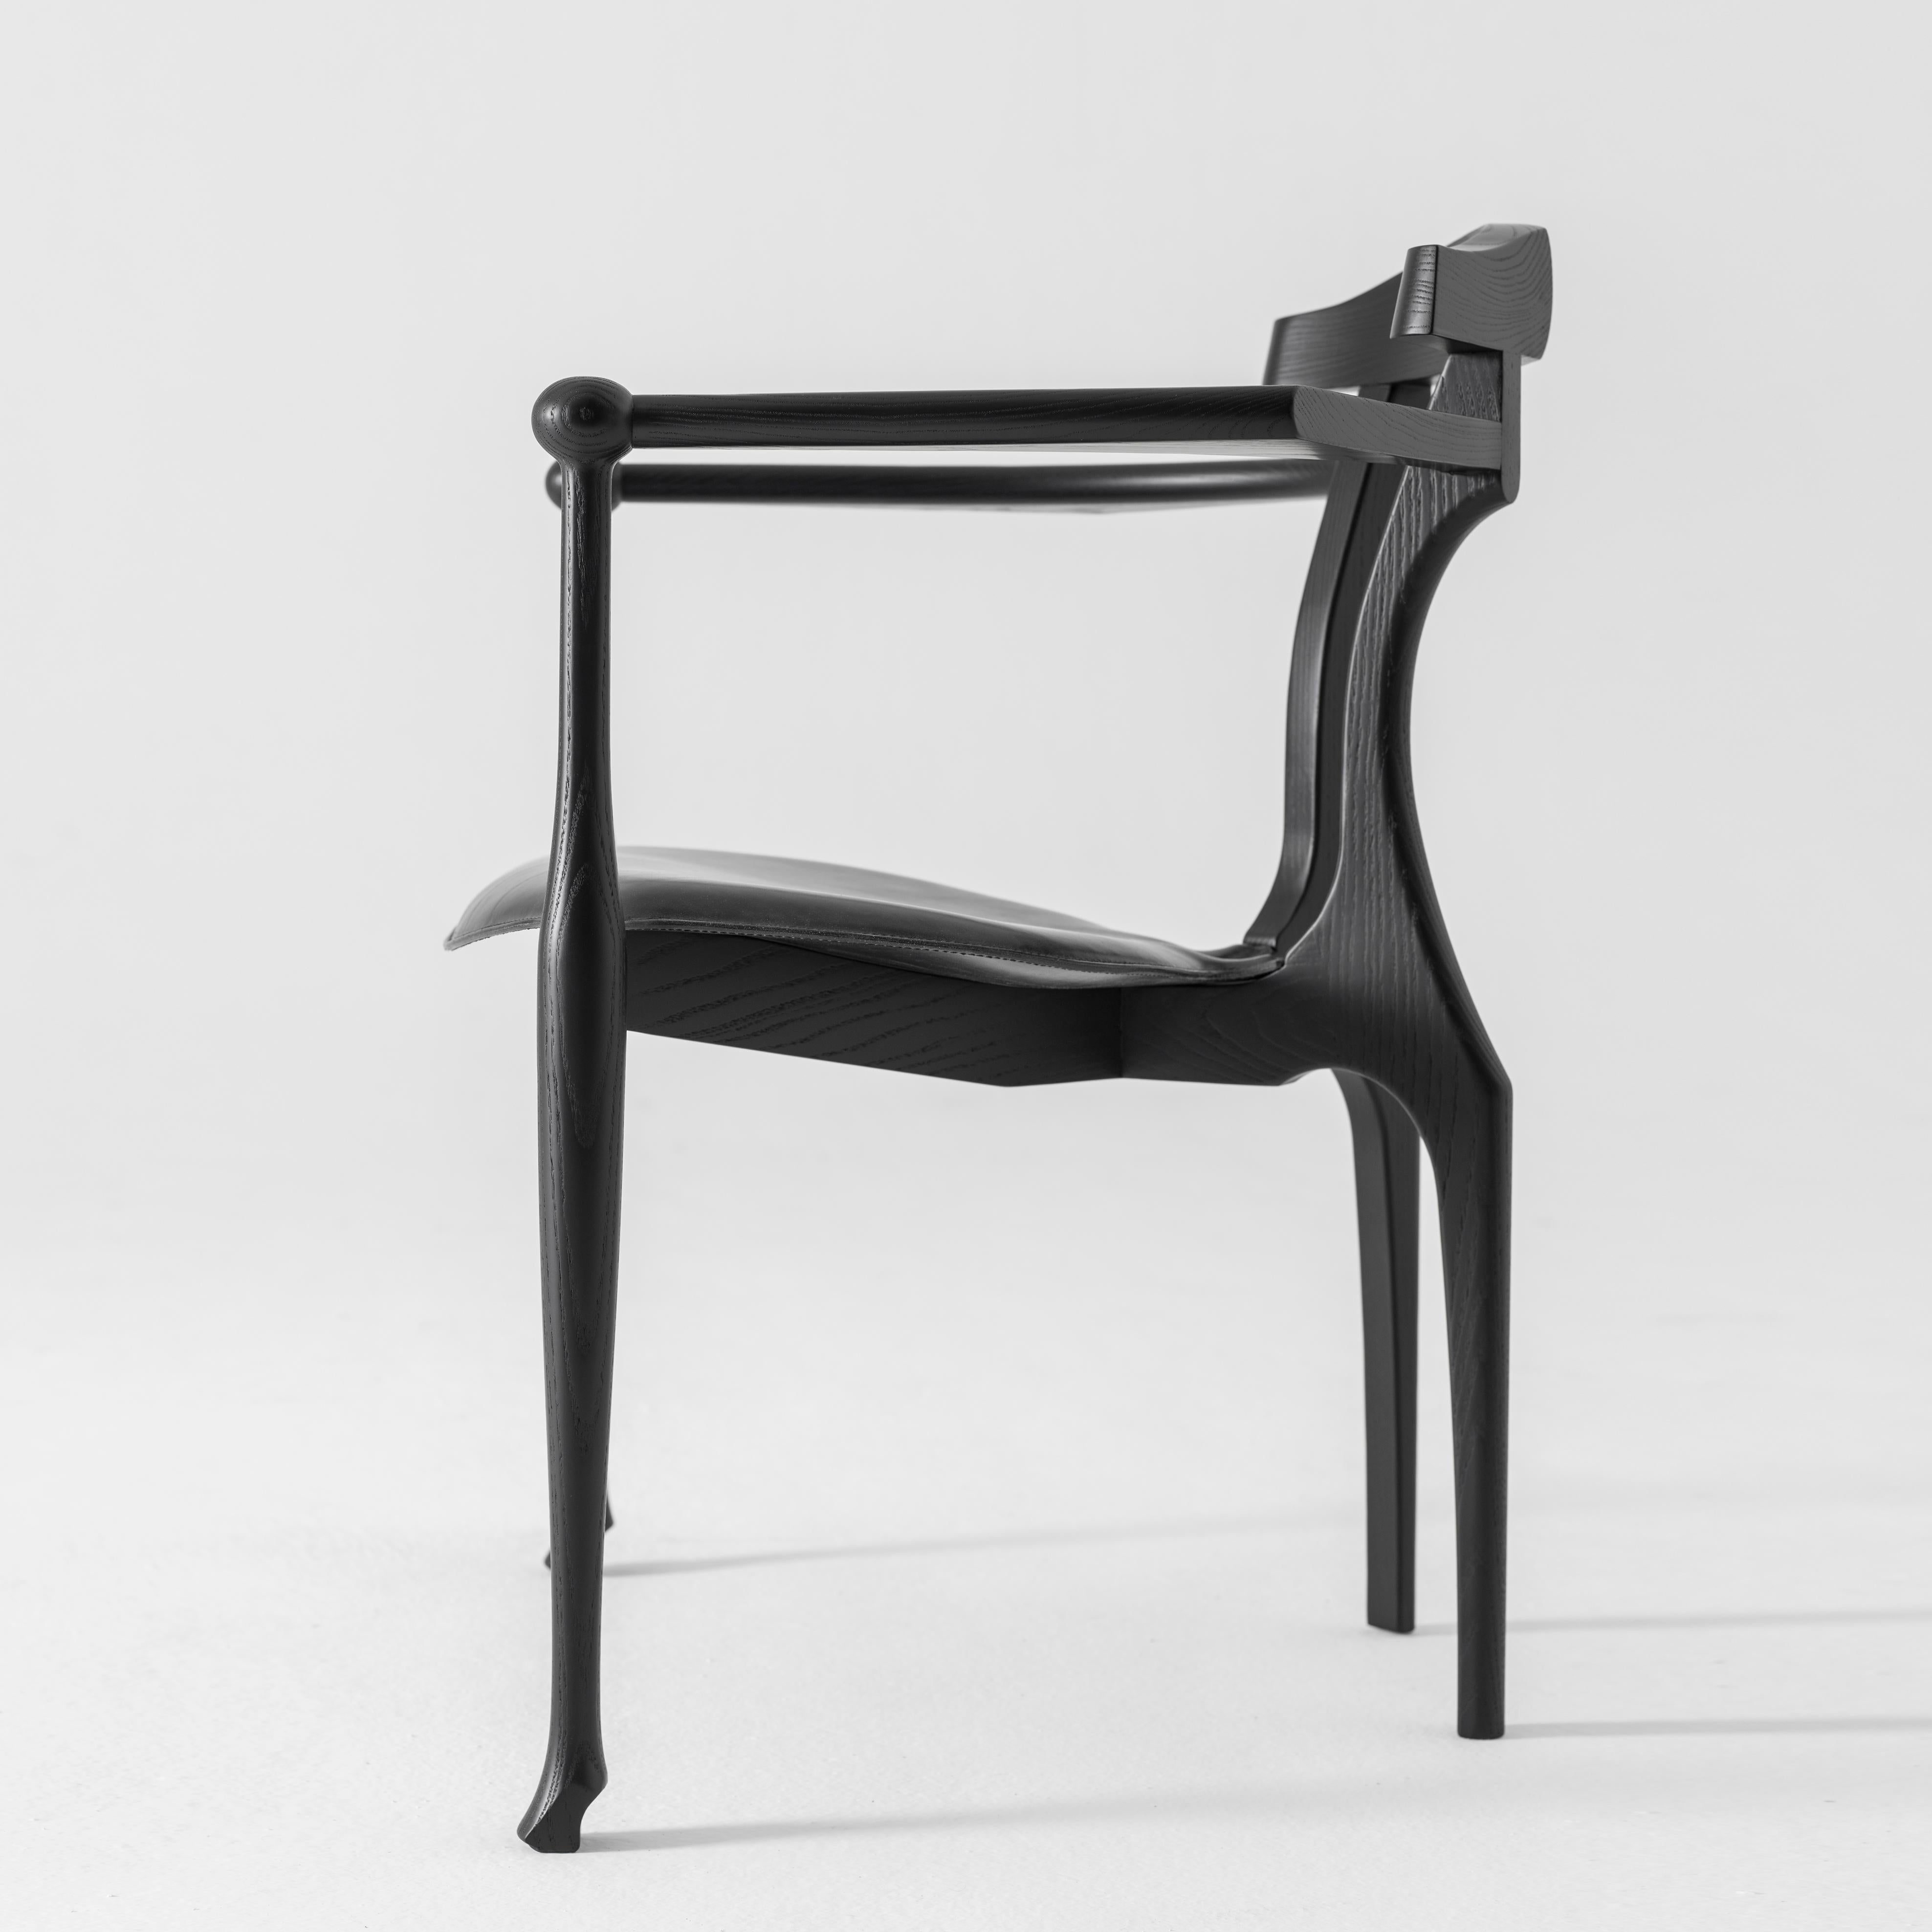 Gaulino easy chair designed by Oscar Tusquets manufactured by BD Barcelona Design.

Solid ash lacquered in black with seat in black hide.


Gaulino chair which, designed in 1987, was selected for the Industrial Design Prize and Adi-Fad in 1989 and